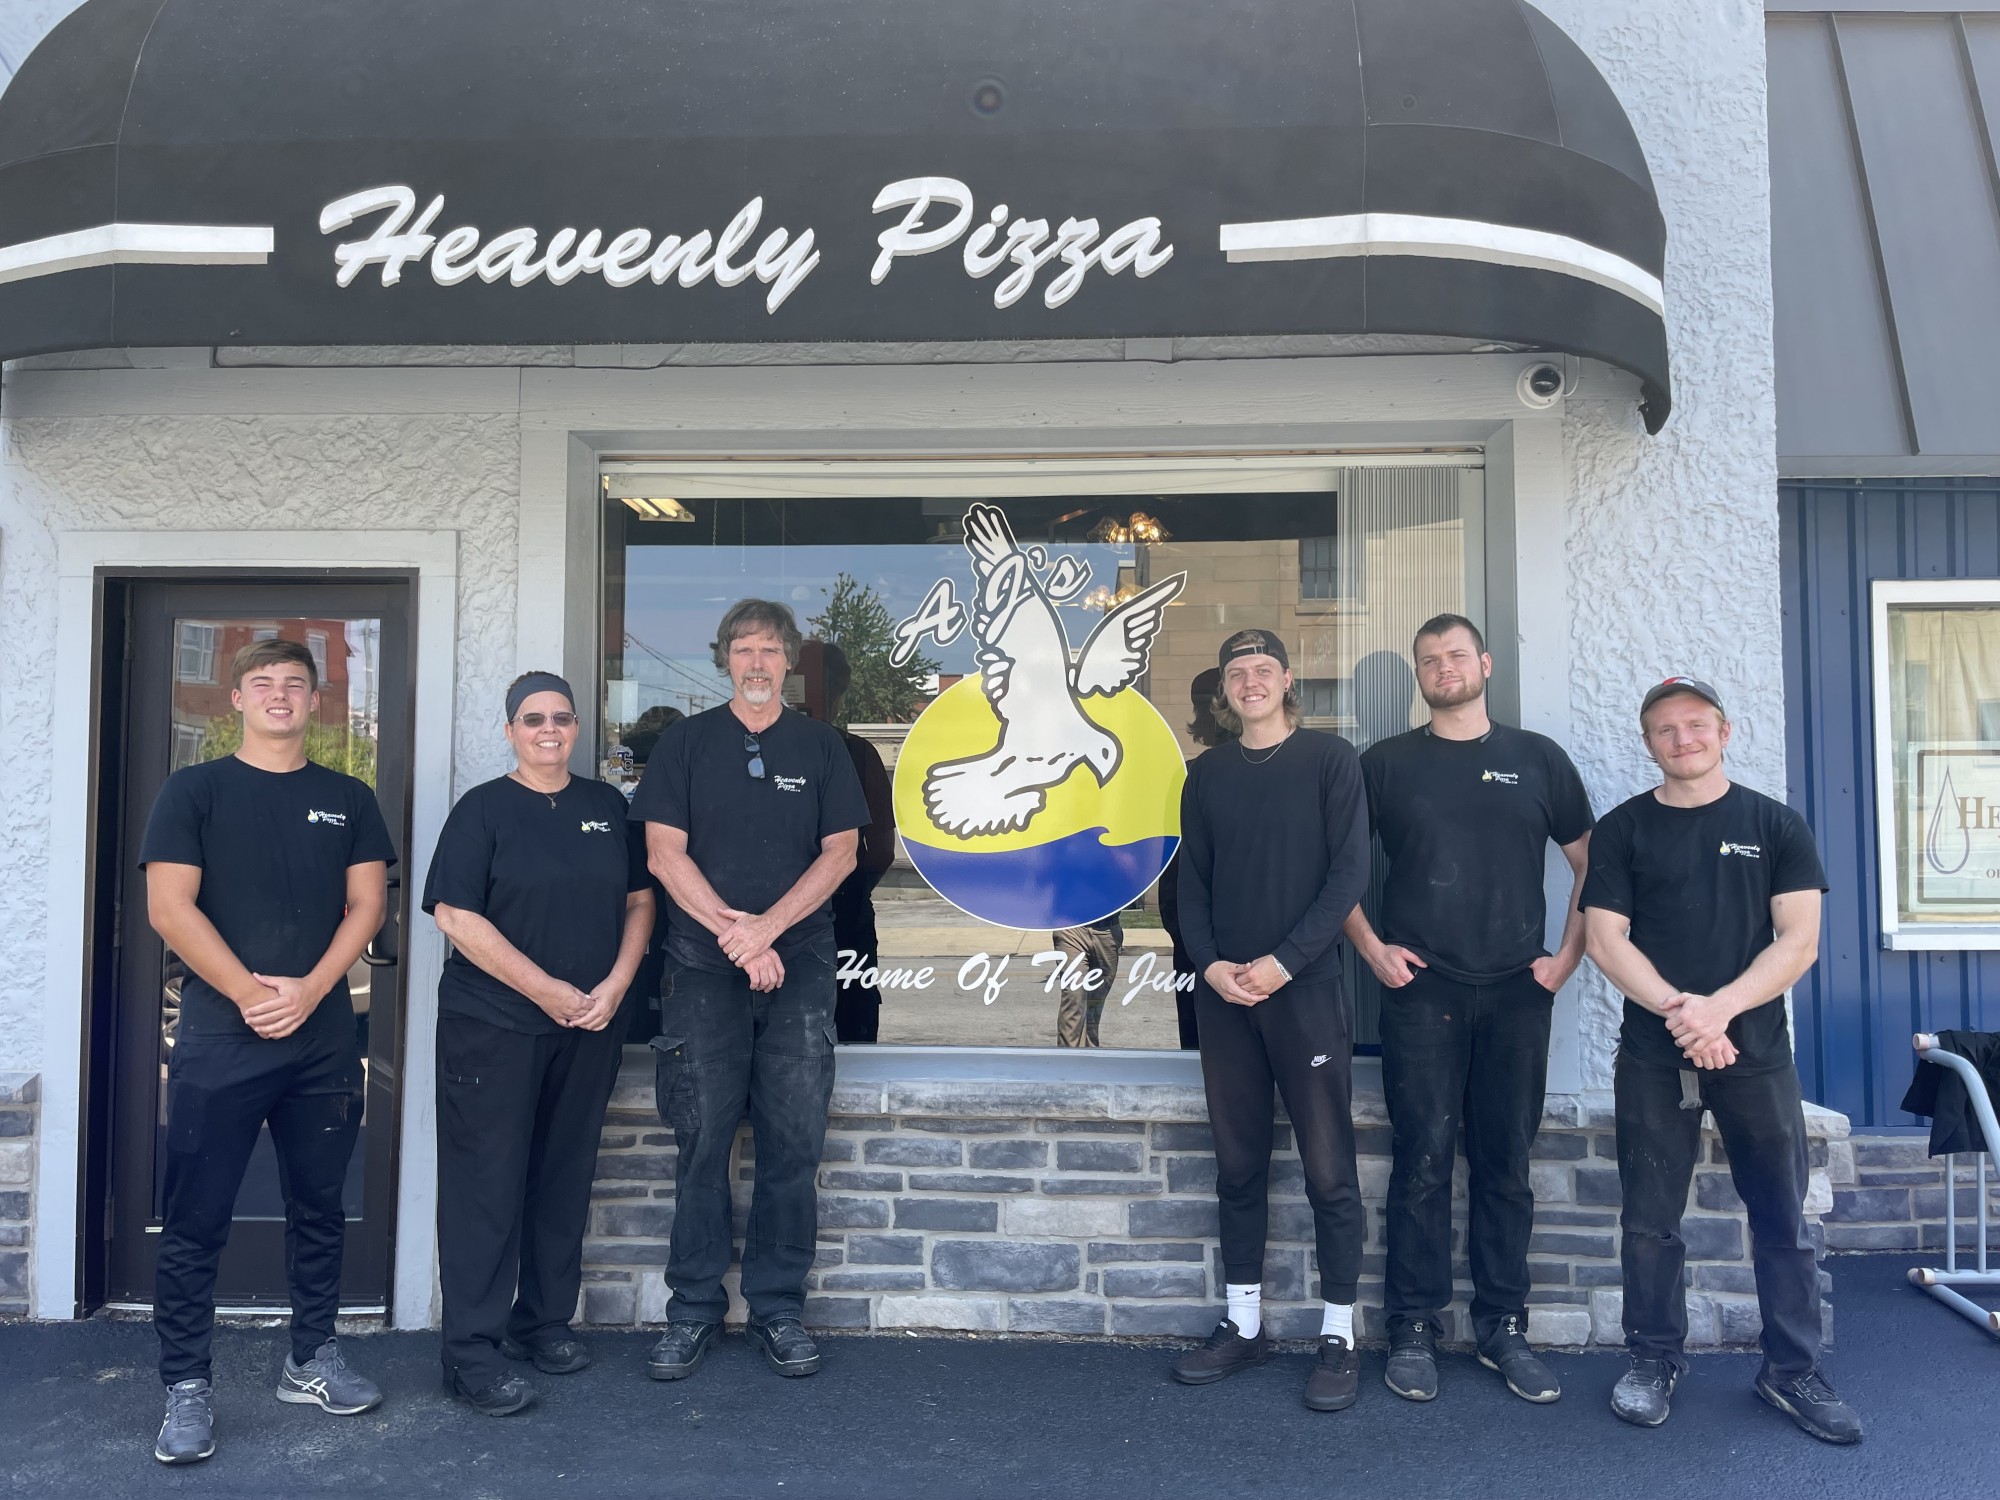 Heavenly Pizza to Celebrate 40th Anniversary and Employee/Customer Appreciation Day